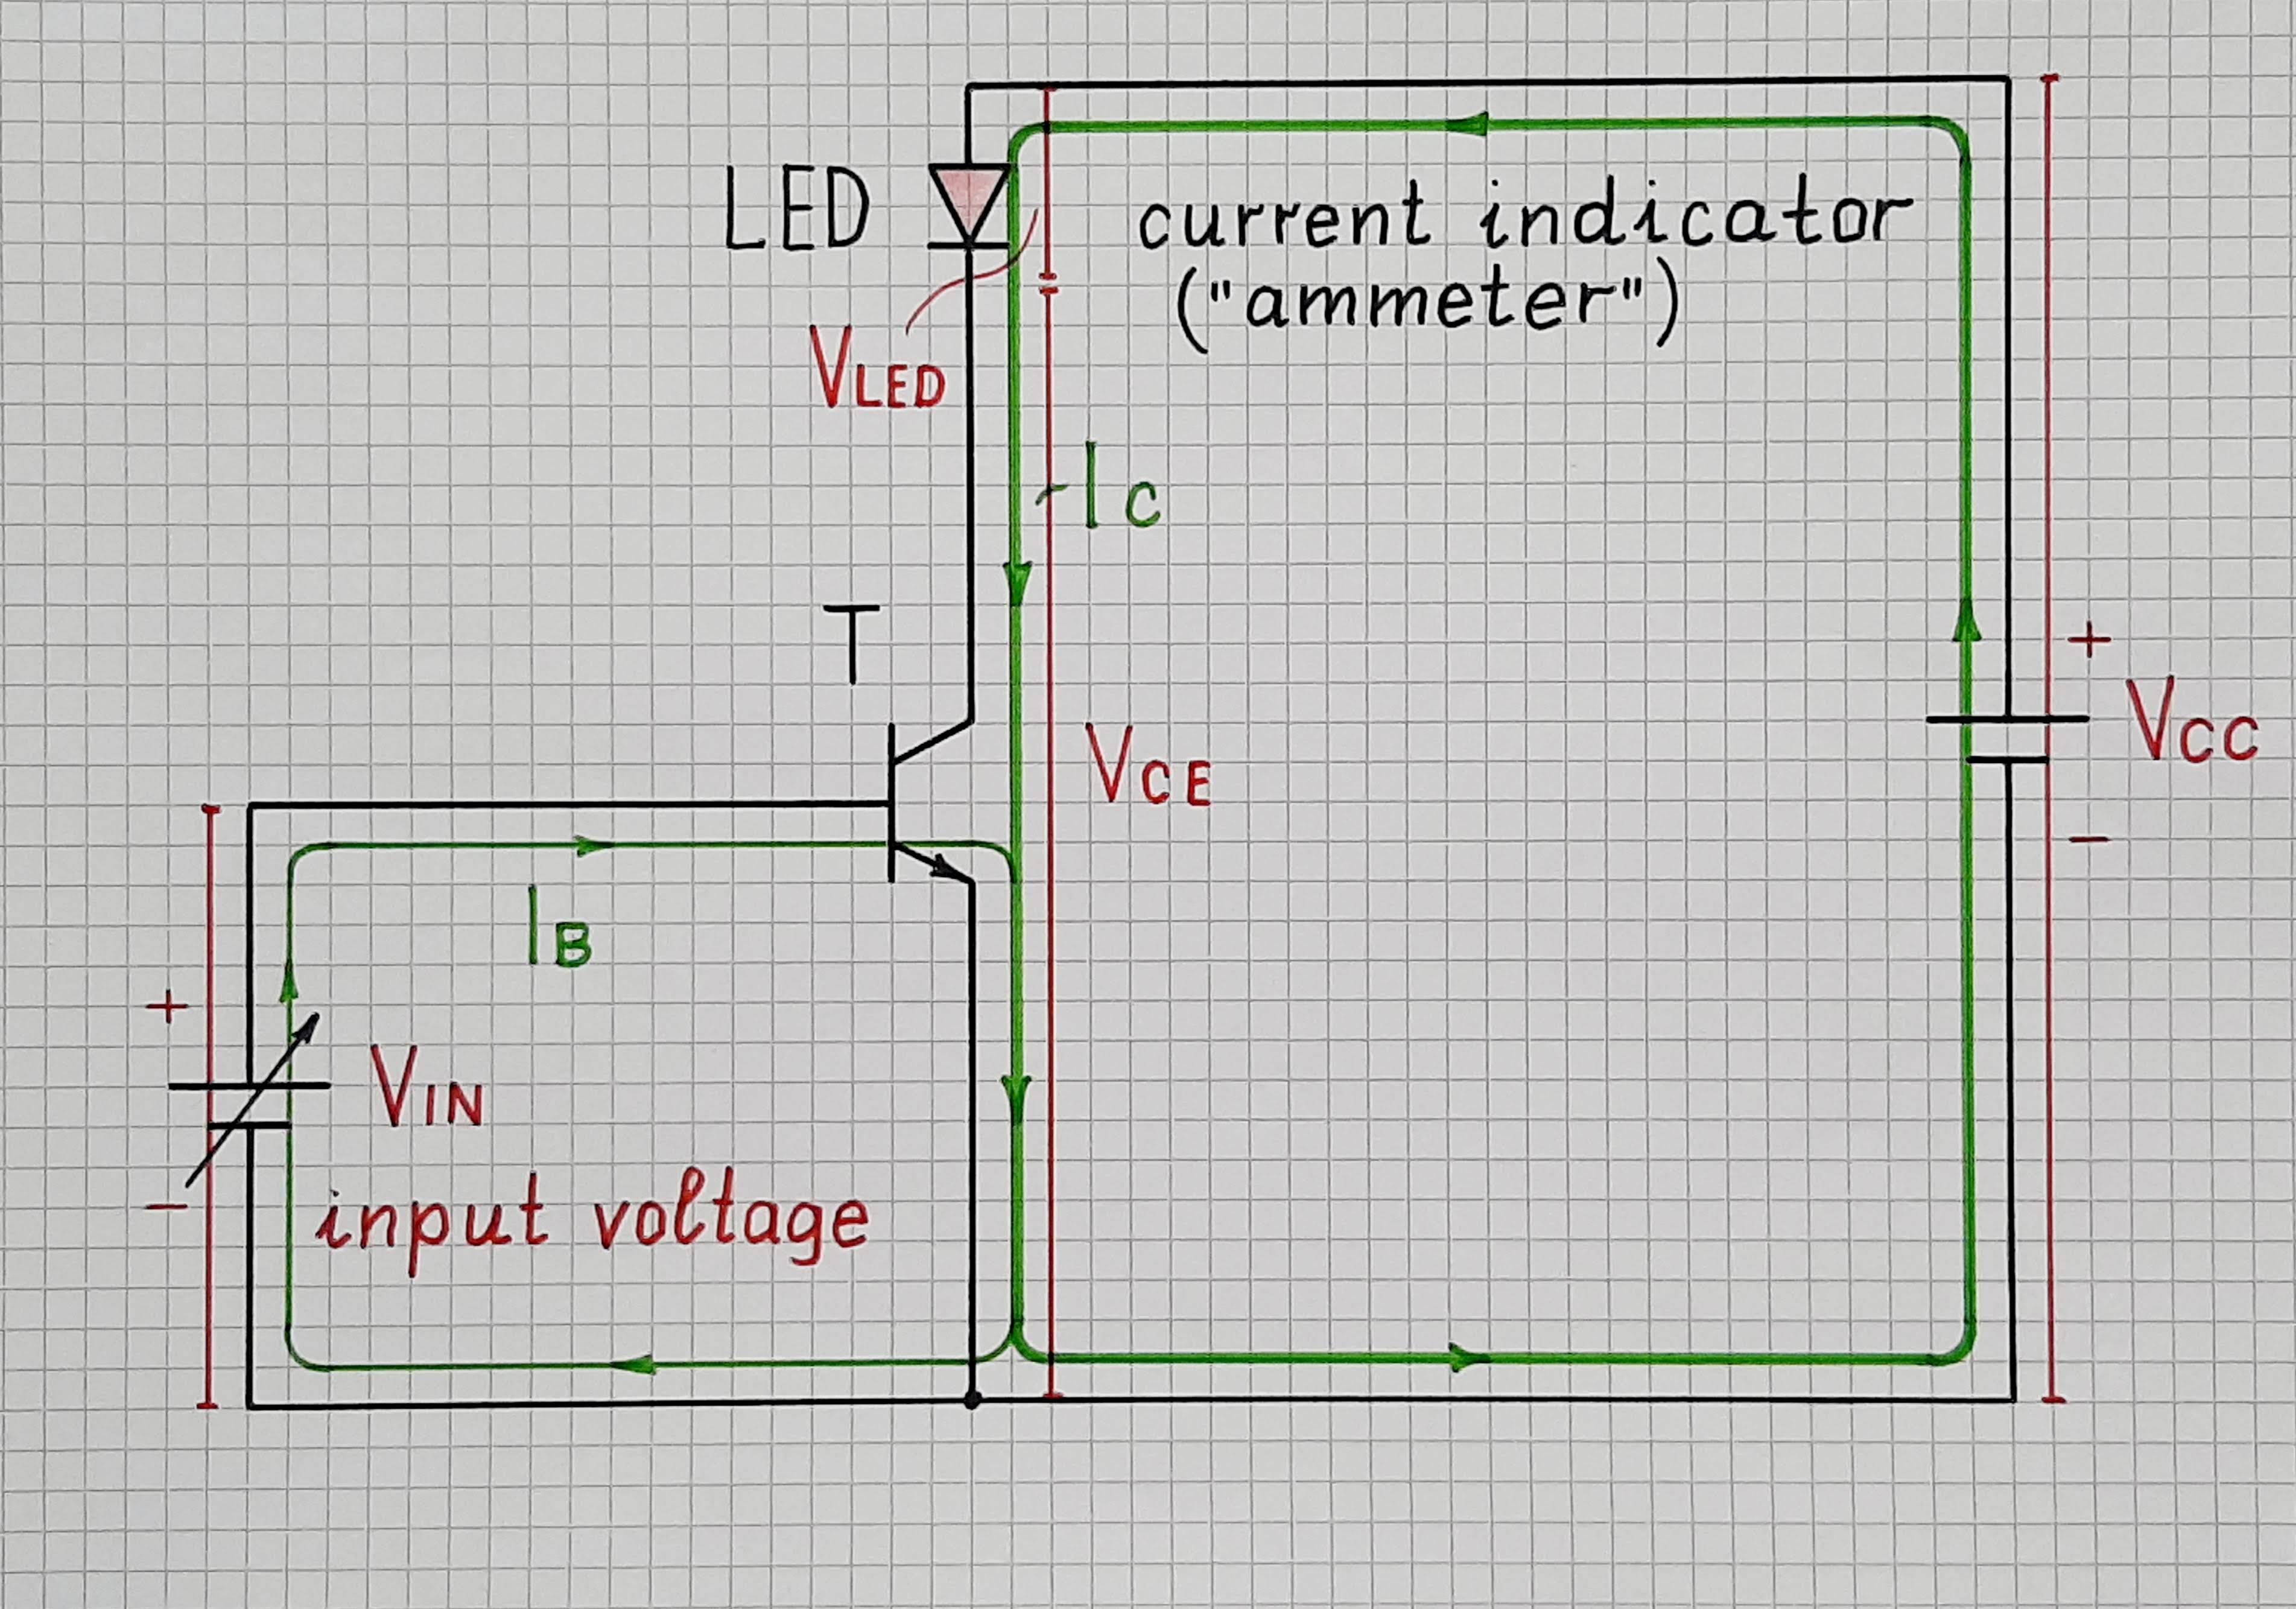 Transistor amplifier with a current output indicated by an LED